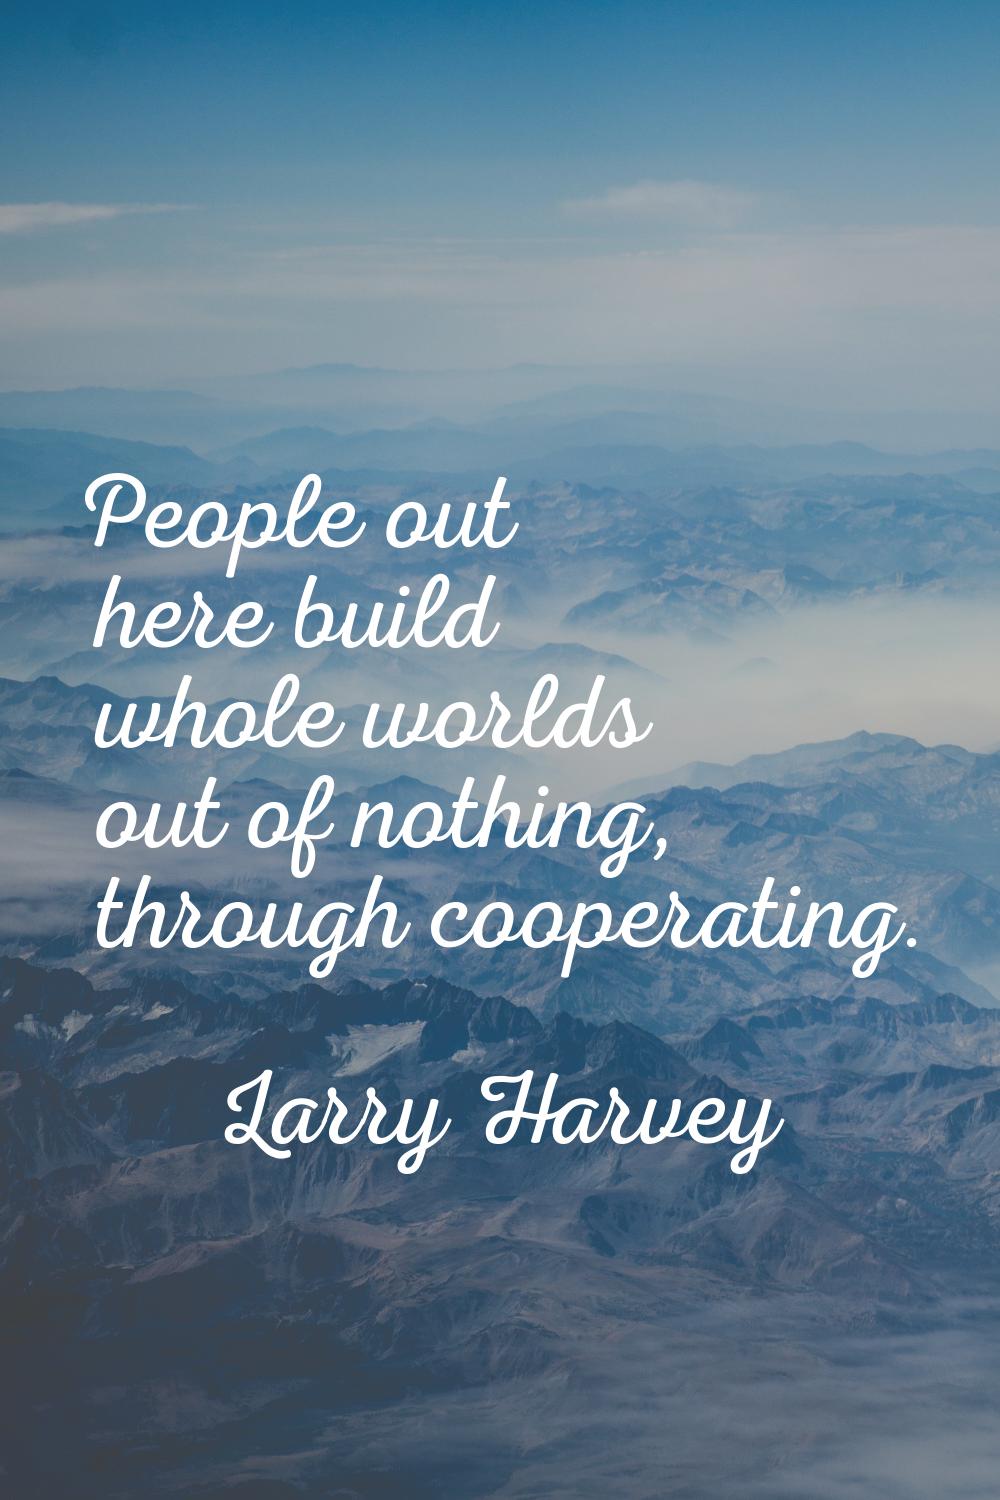 People out here build whole worlds out of nothing, through cooperating.